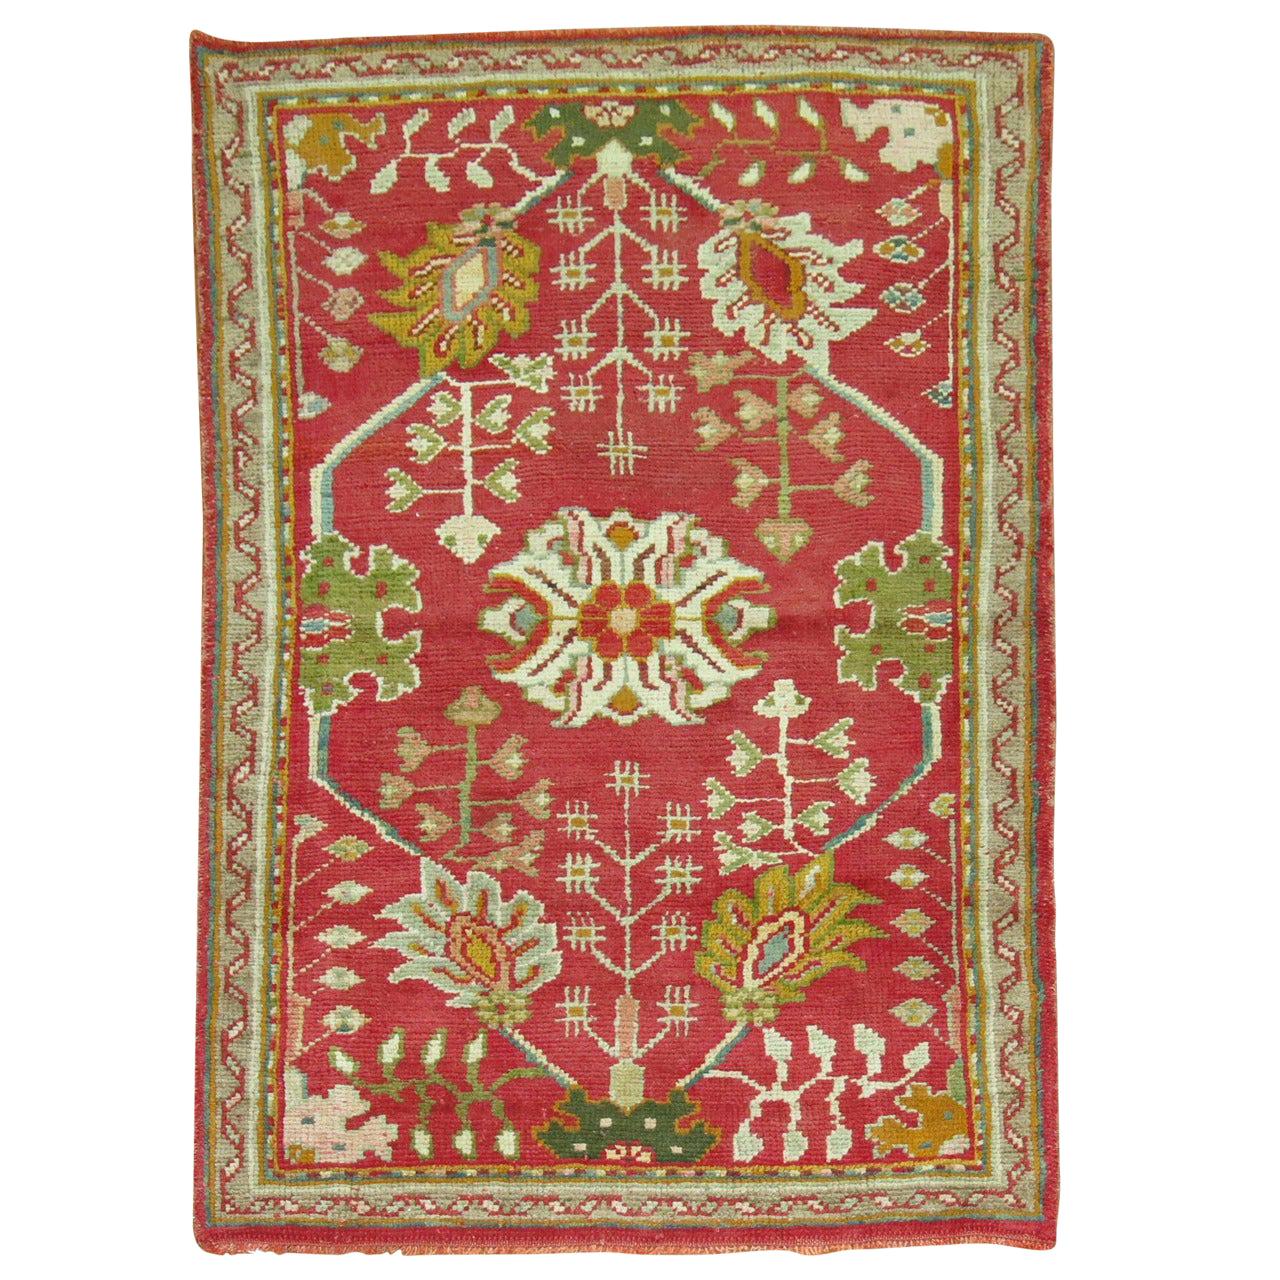 Early 20th Century Bright Red Green Antique Turkish Oushak Carpet